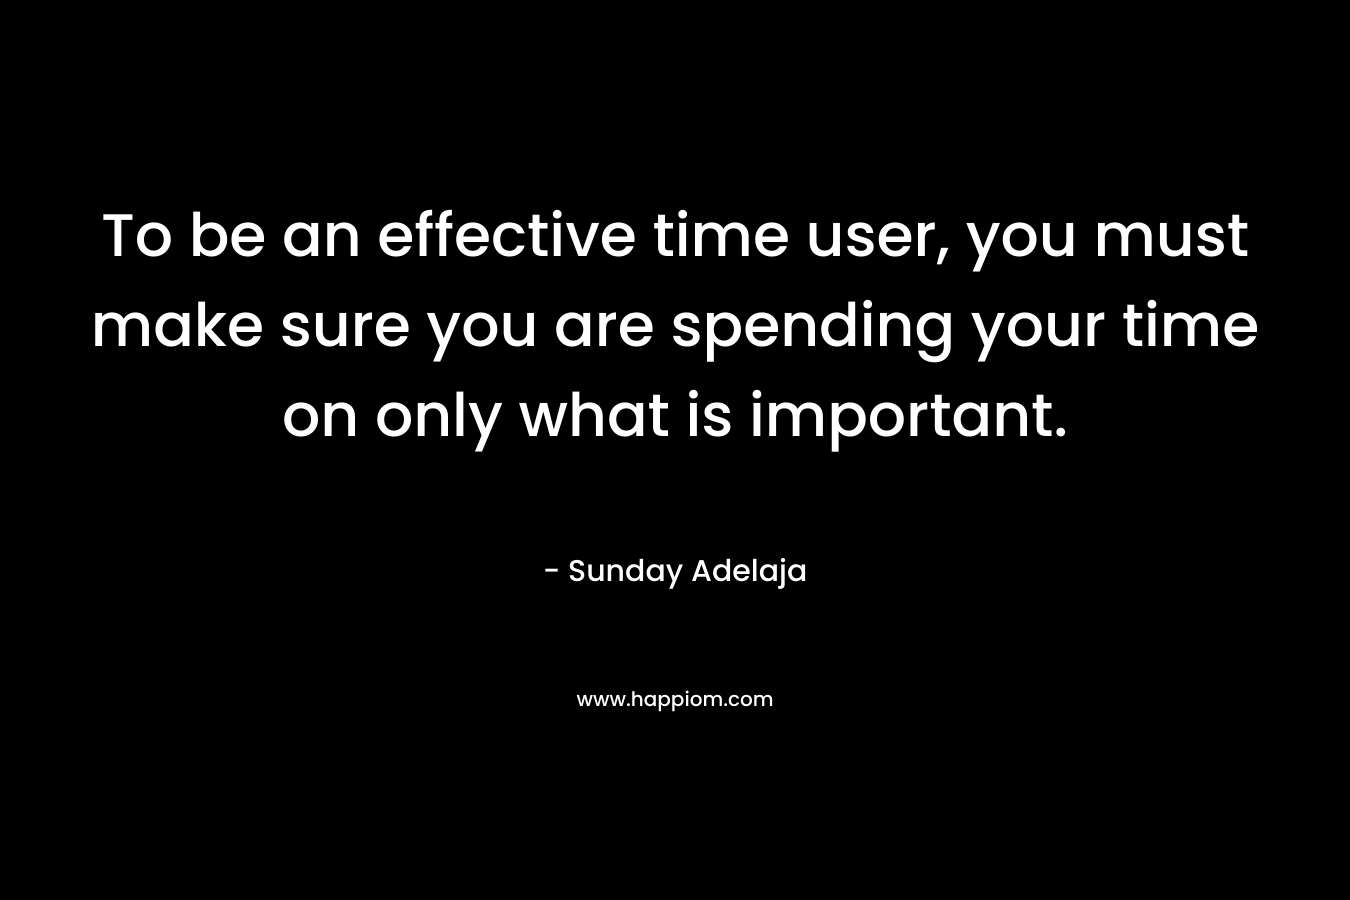 To be an effective time user, you must make sure you are spending your time on only what is important.